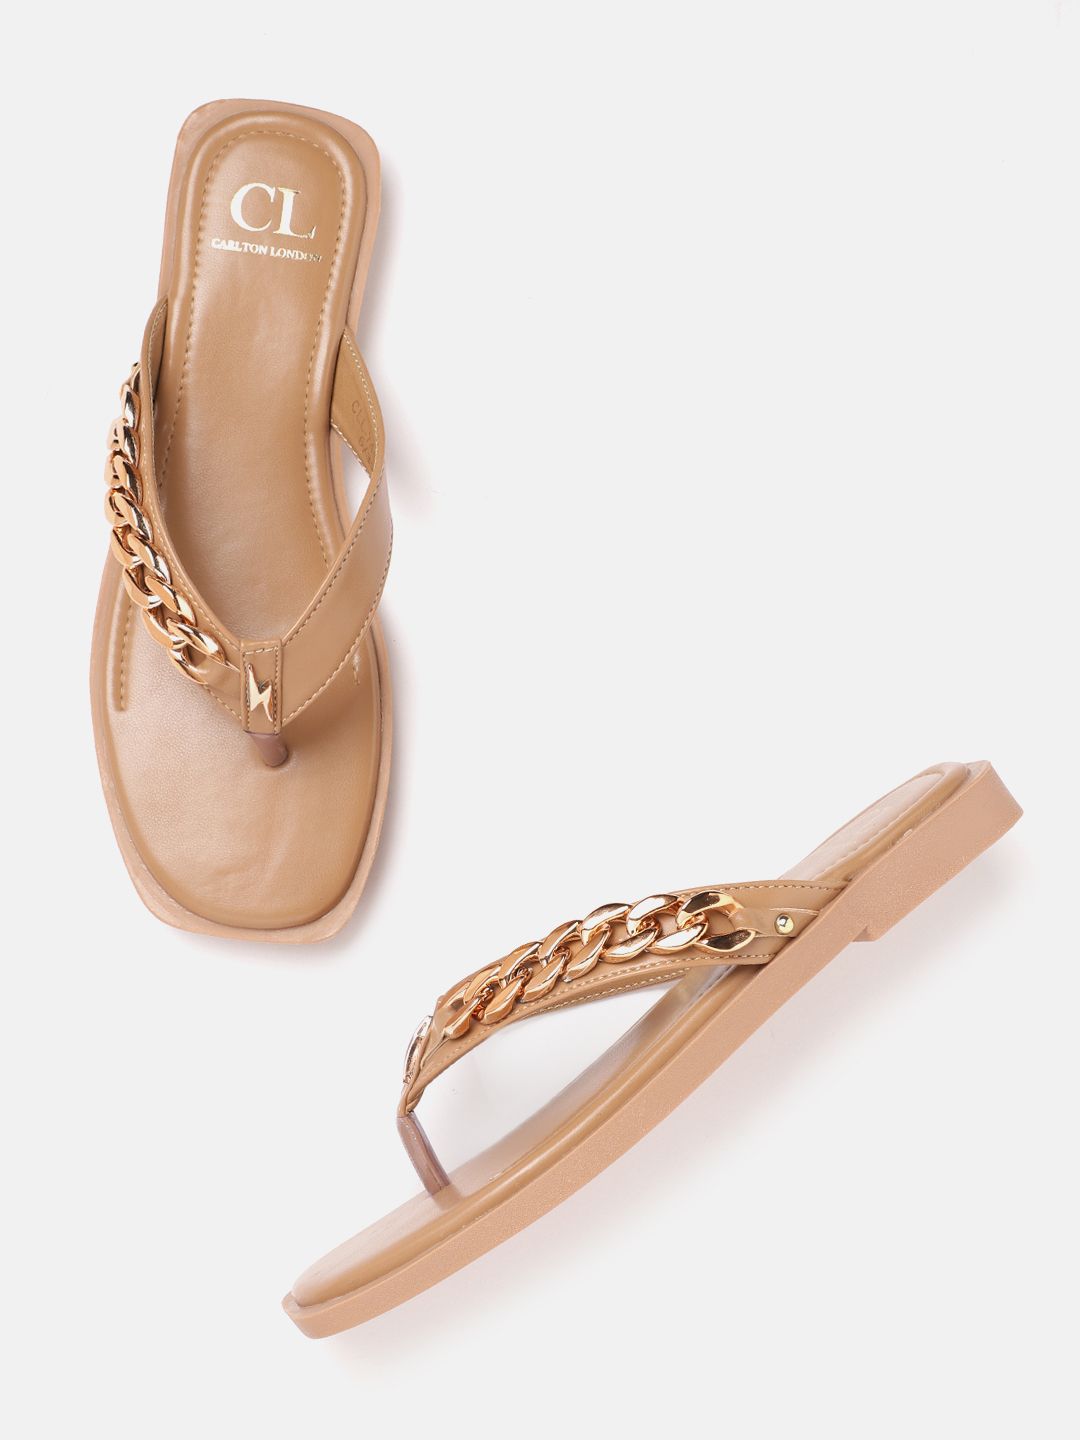 Carlton London Women Tan Brown Solid Open Toe Flats with Chain Detail Price in India